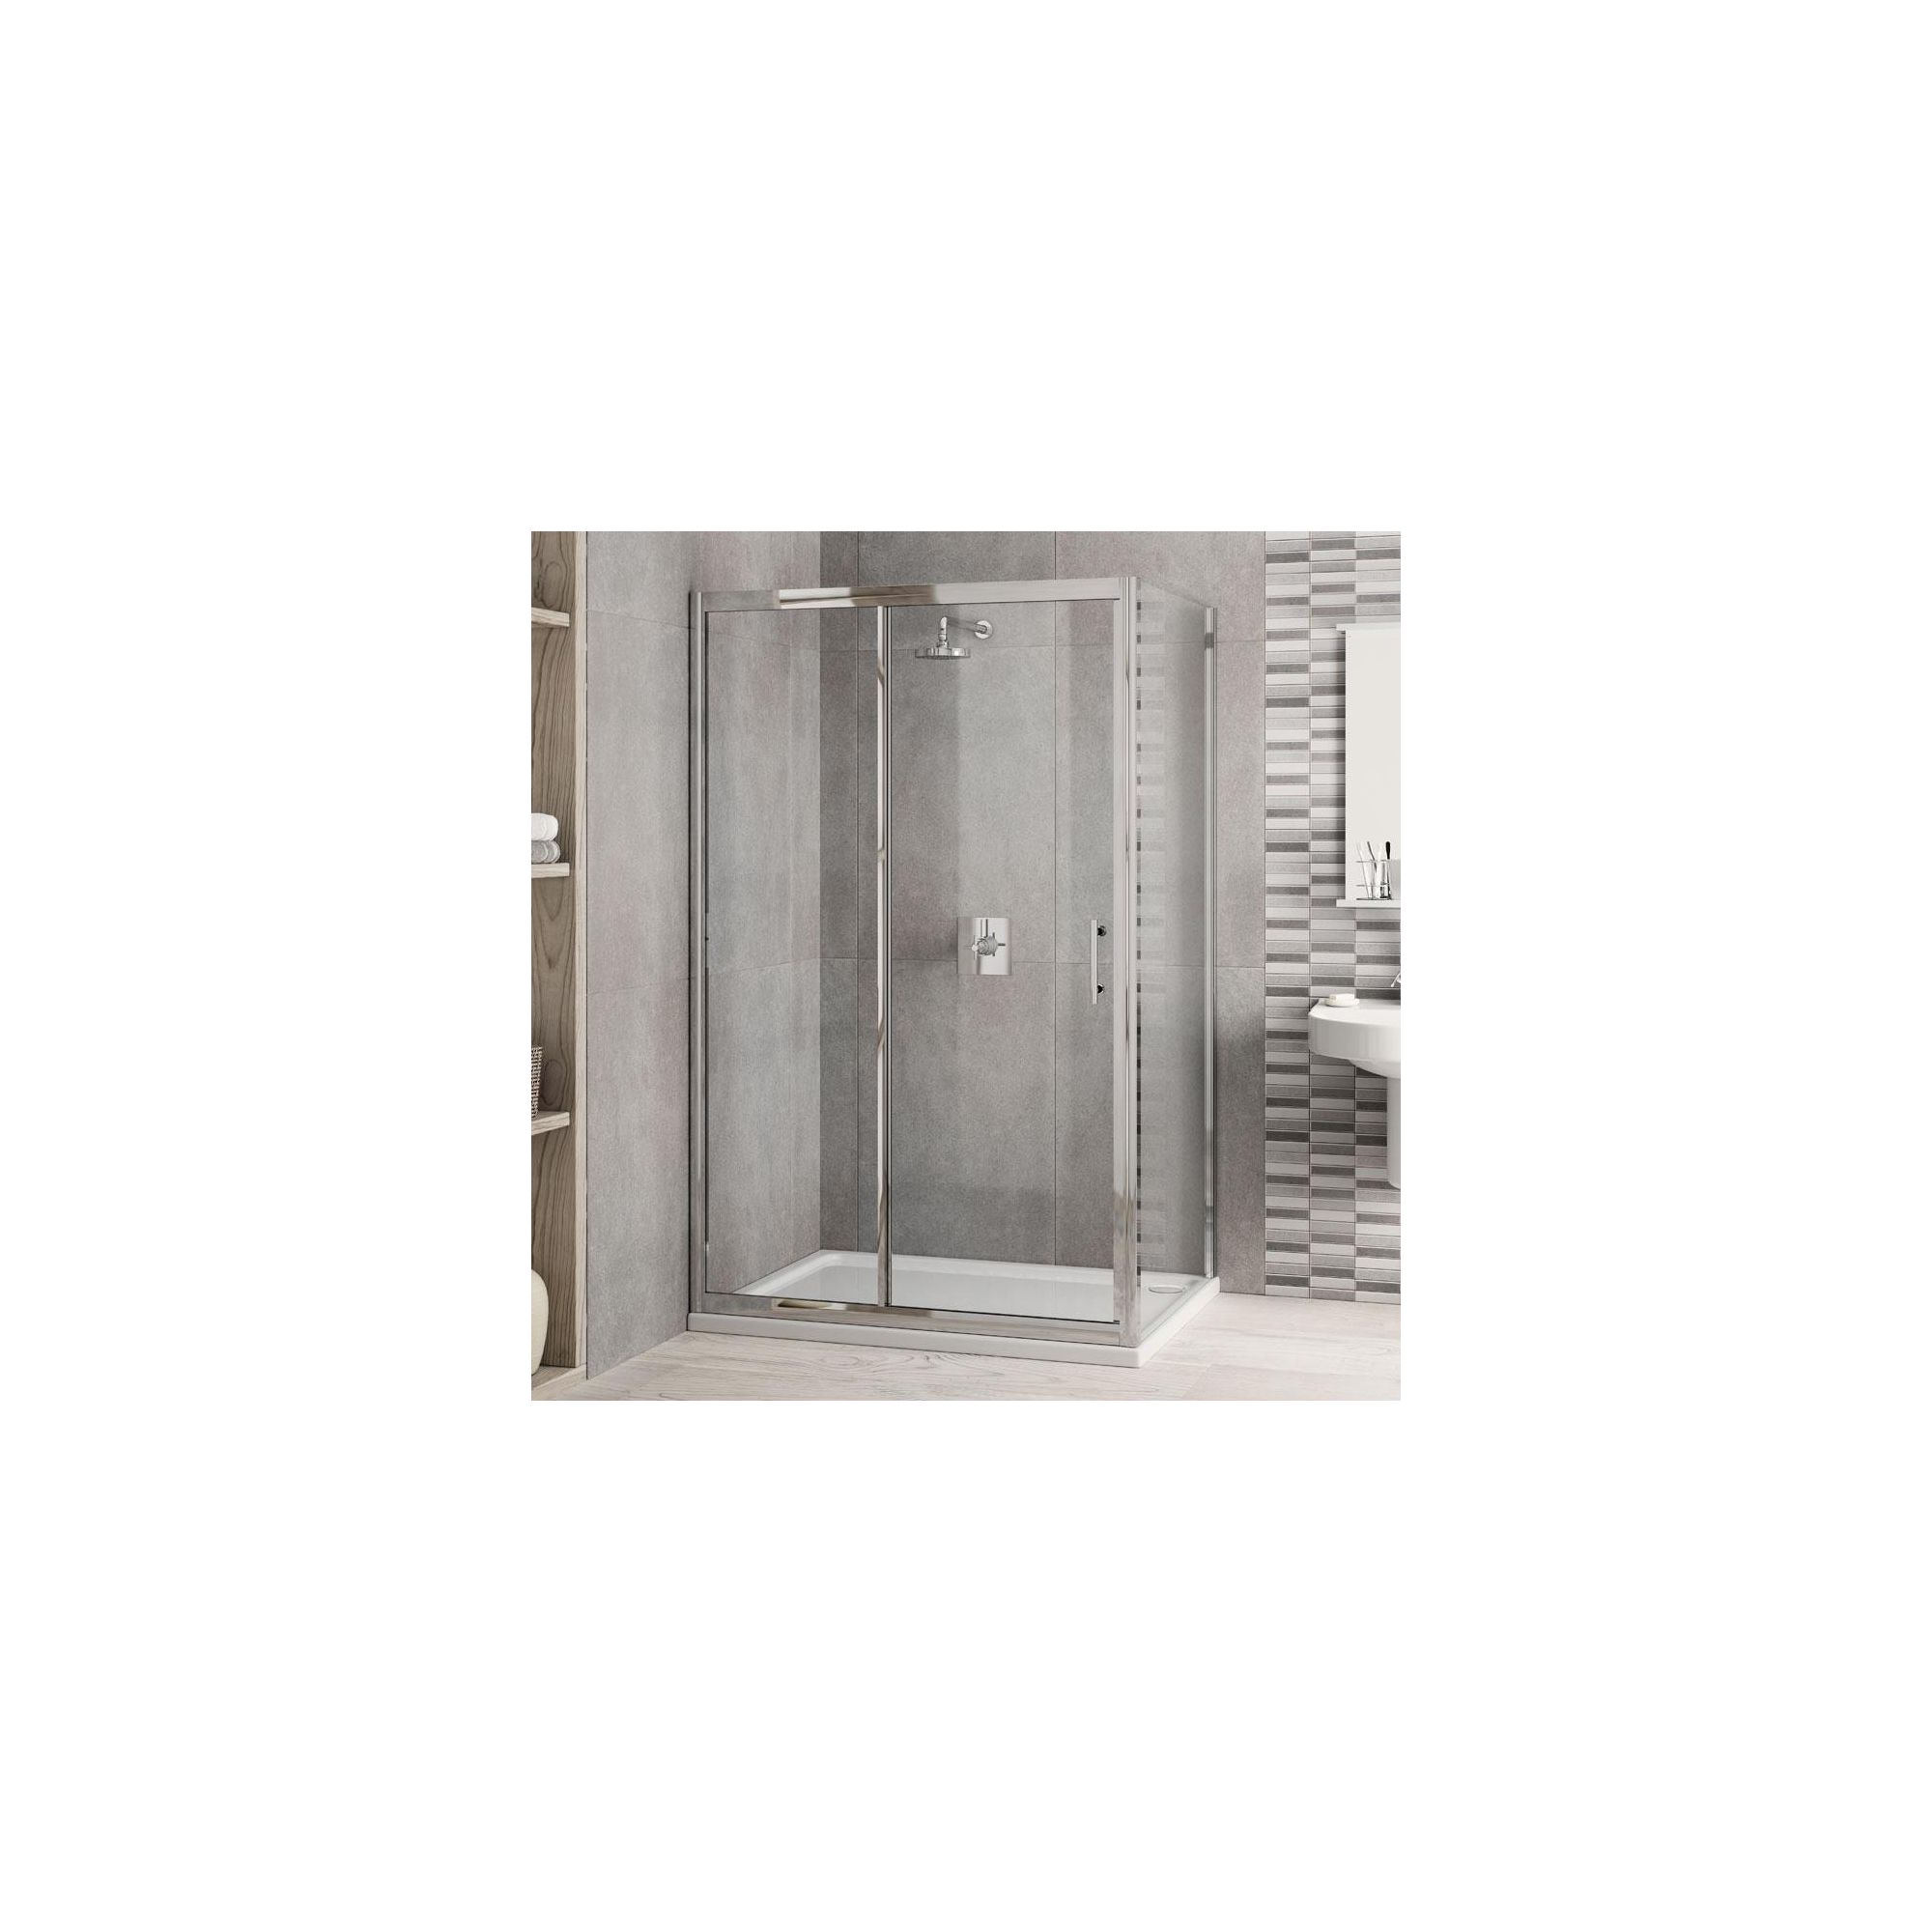 Elemis Inspire Two-Panel Jumbo Sliding Door Shower Enclosure, 1200mm x 900mm, 6mm Glass, Low Profile Tray at Tesco Direct